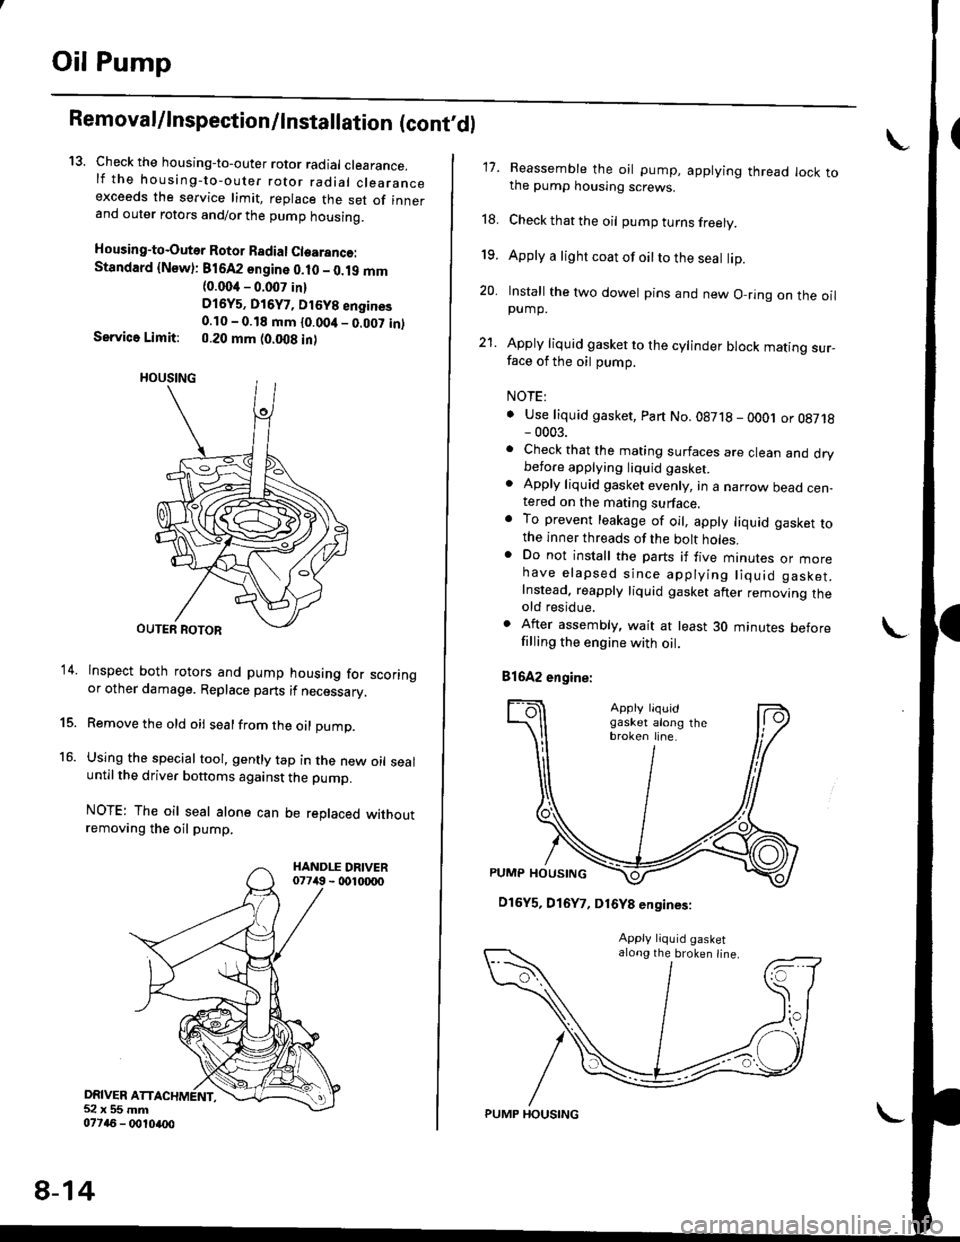 HONDA CIVIC 1996 6.G Workshop Manual Oil Pump
RemovaUlnspection/lnstallation (contdl
13. Check the housing-to-outer rotor radial clearance.lf the housing-to-outer rotor radial clearanceexceeds the service limit, replace the set of inner